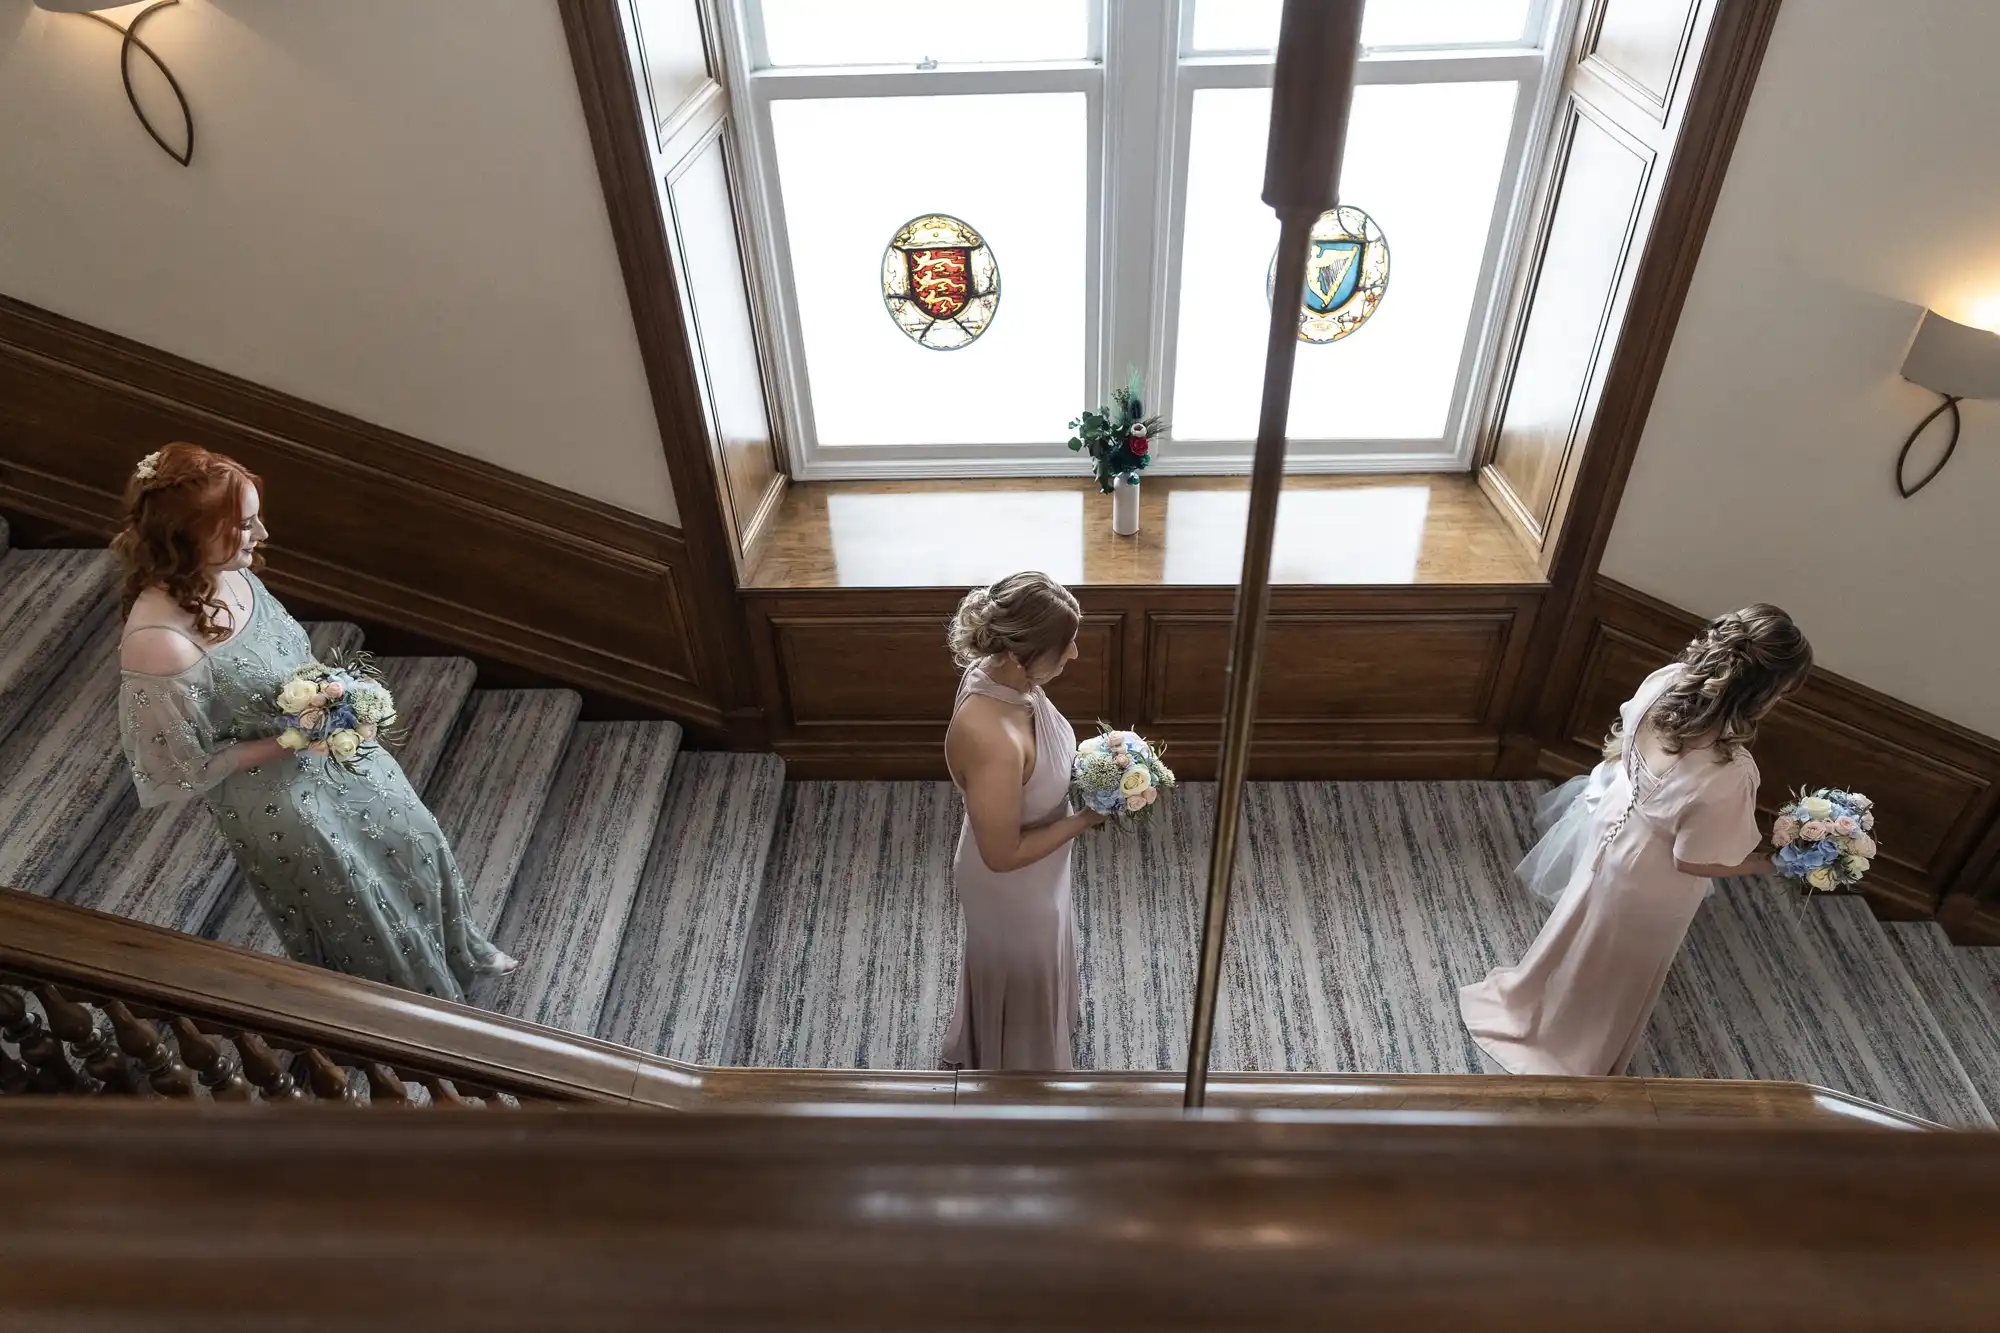 Three bridesmaids in elegant dresses holding bouquets stand on a grand staircase with stained glass windows above.